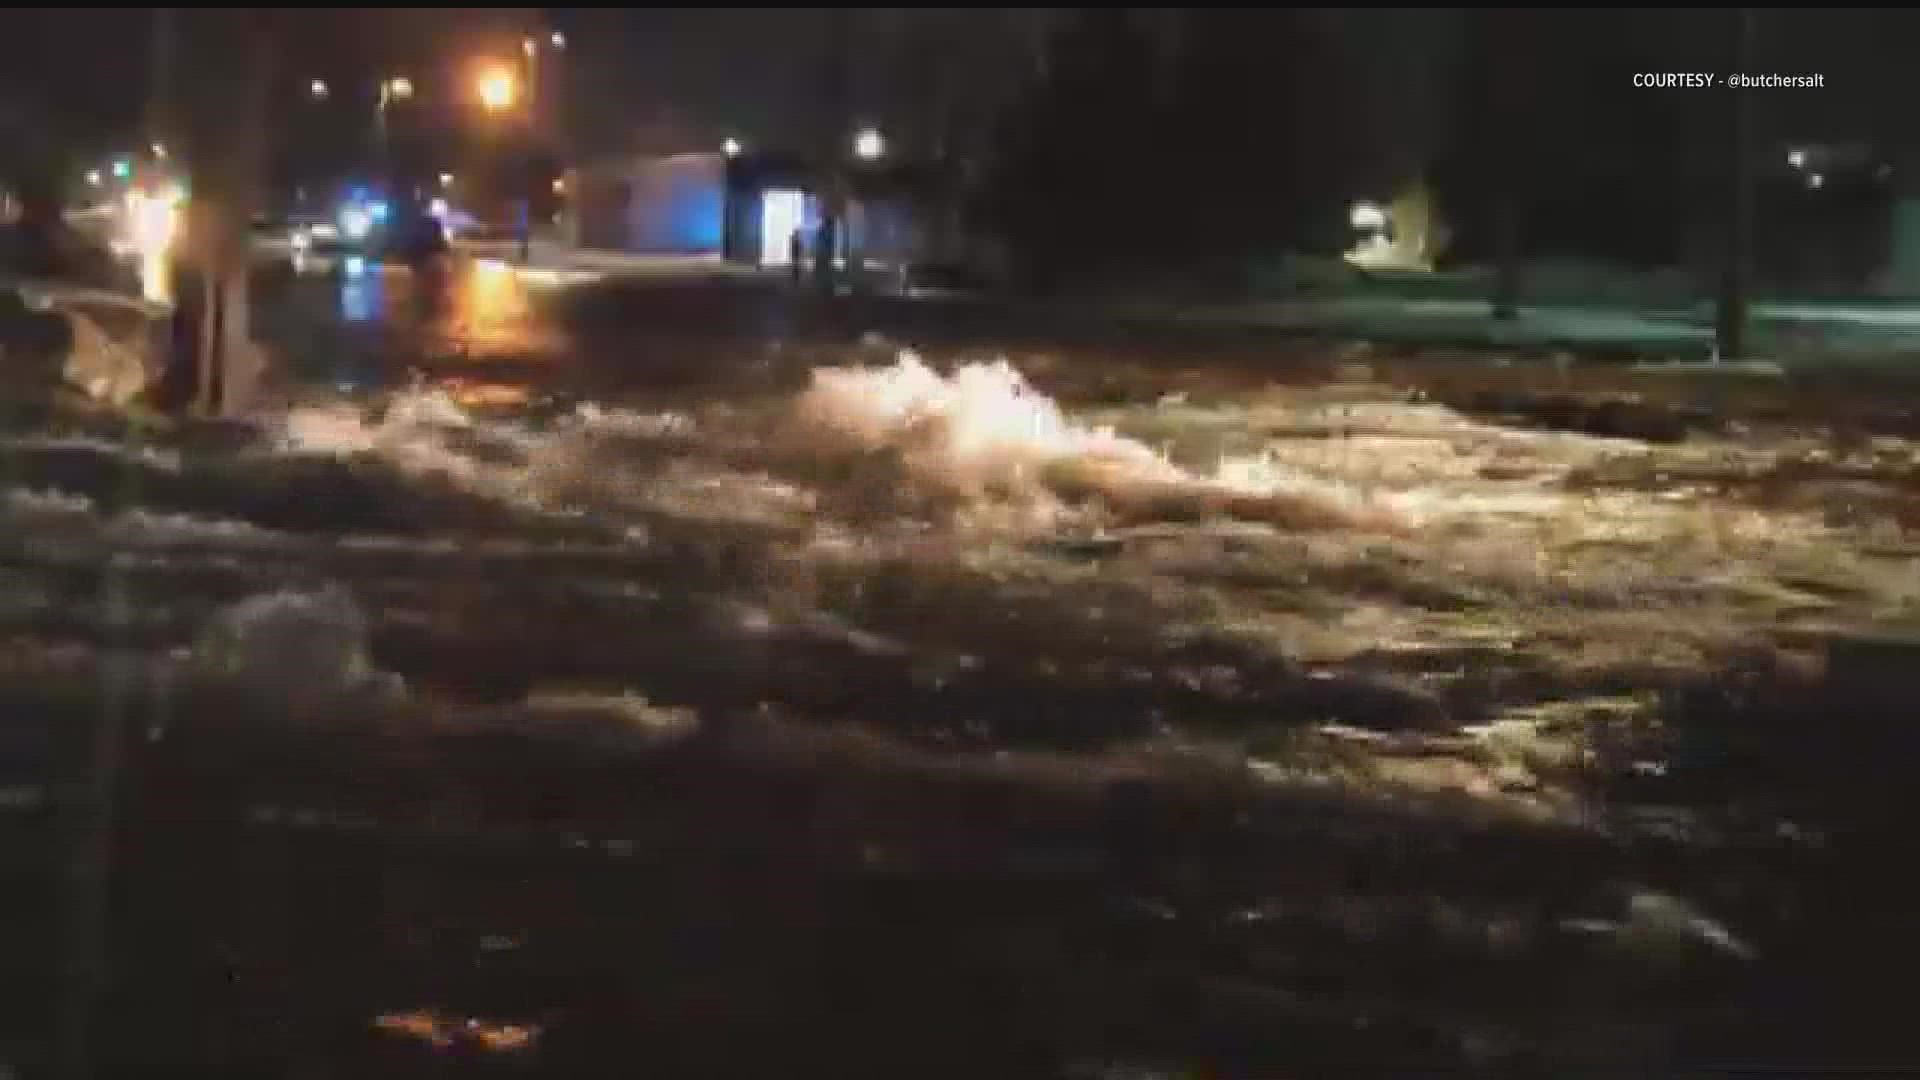 The city issued the advisory after the area was impacted by a large water main break Monday night.